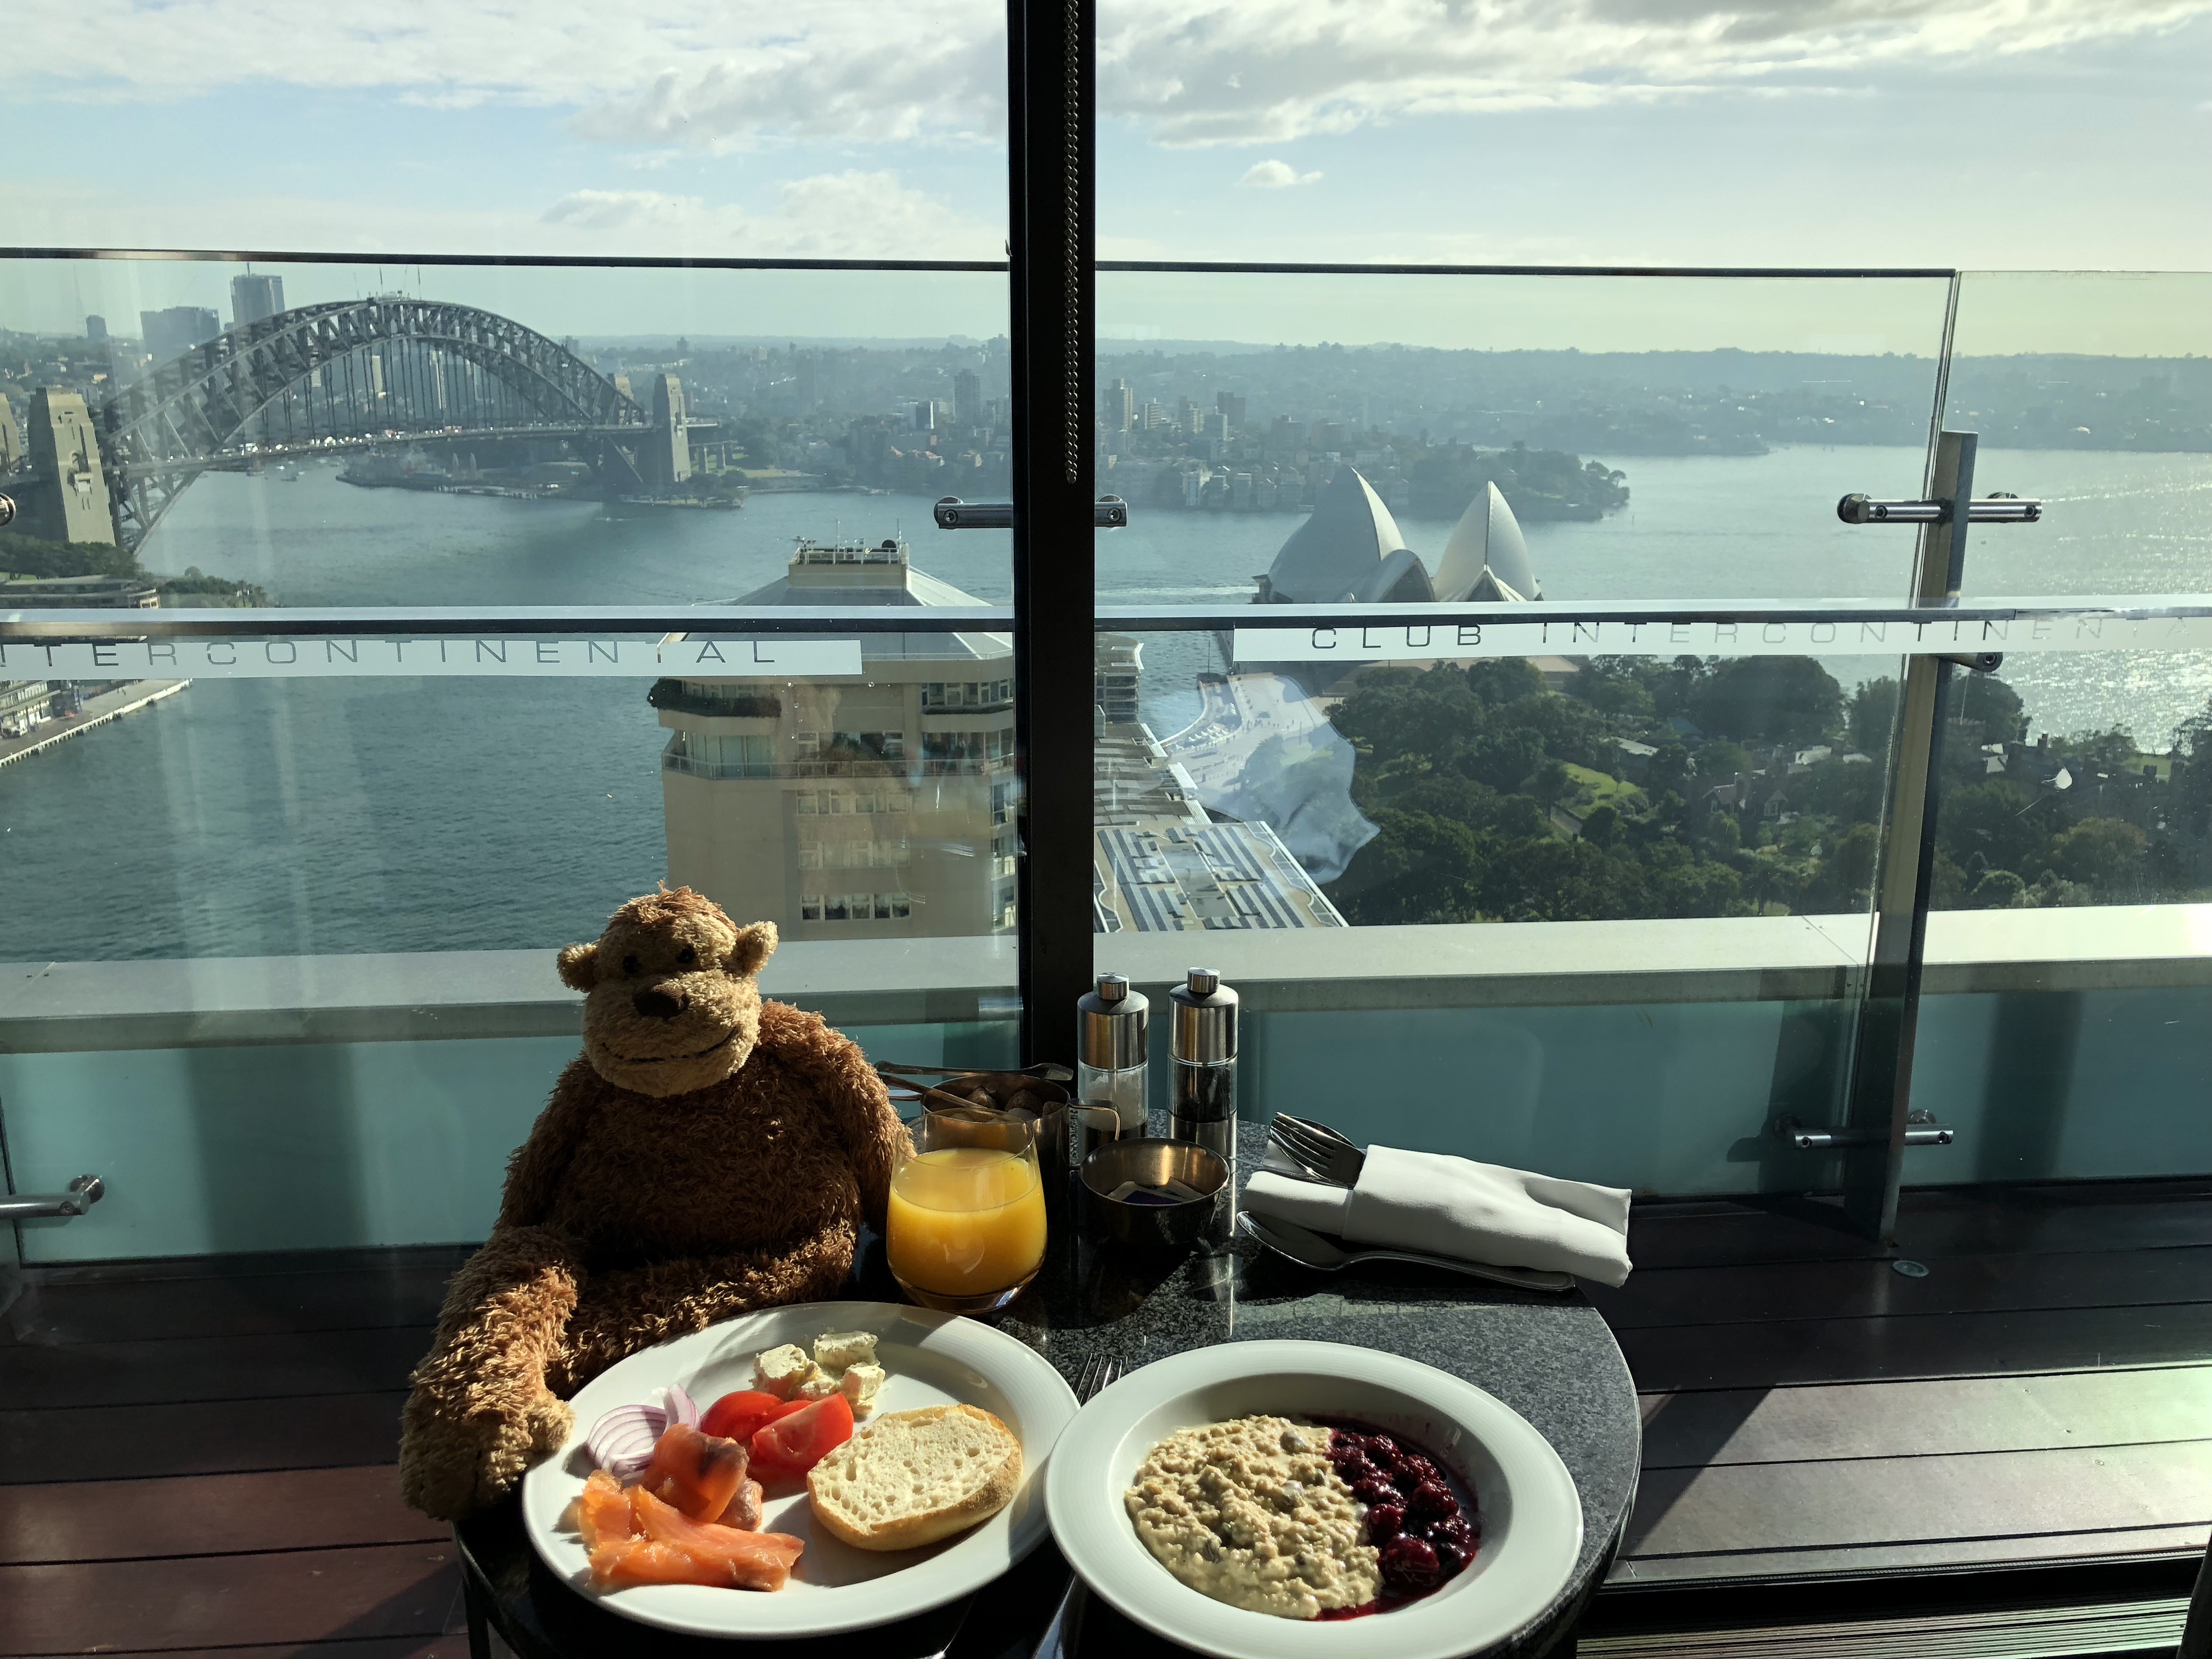 a stuffed monkey sitting at a table with food and drinks